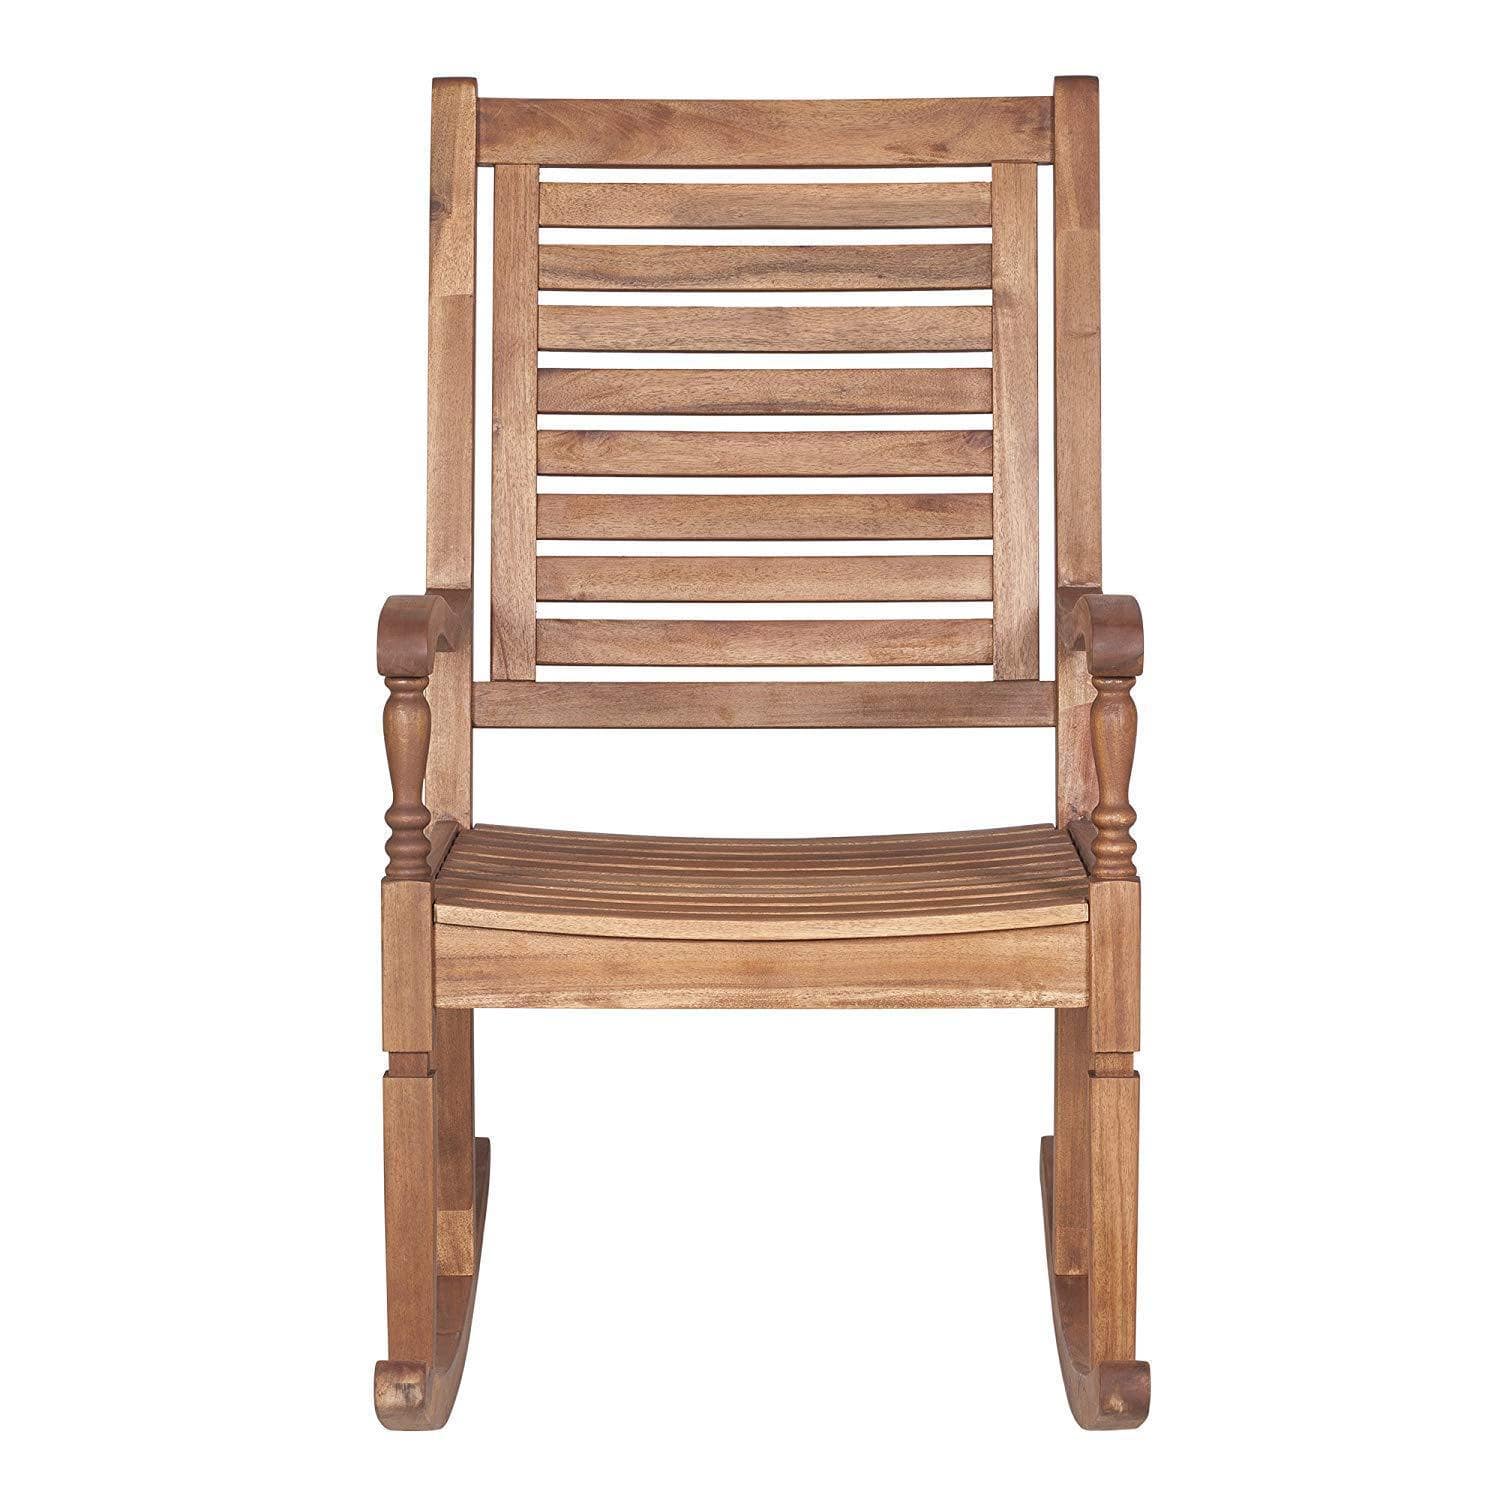 Solid & Primary Wood Rocking Chair/Standard Size Wooden Recliner